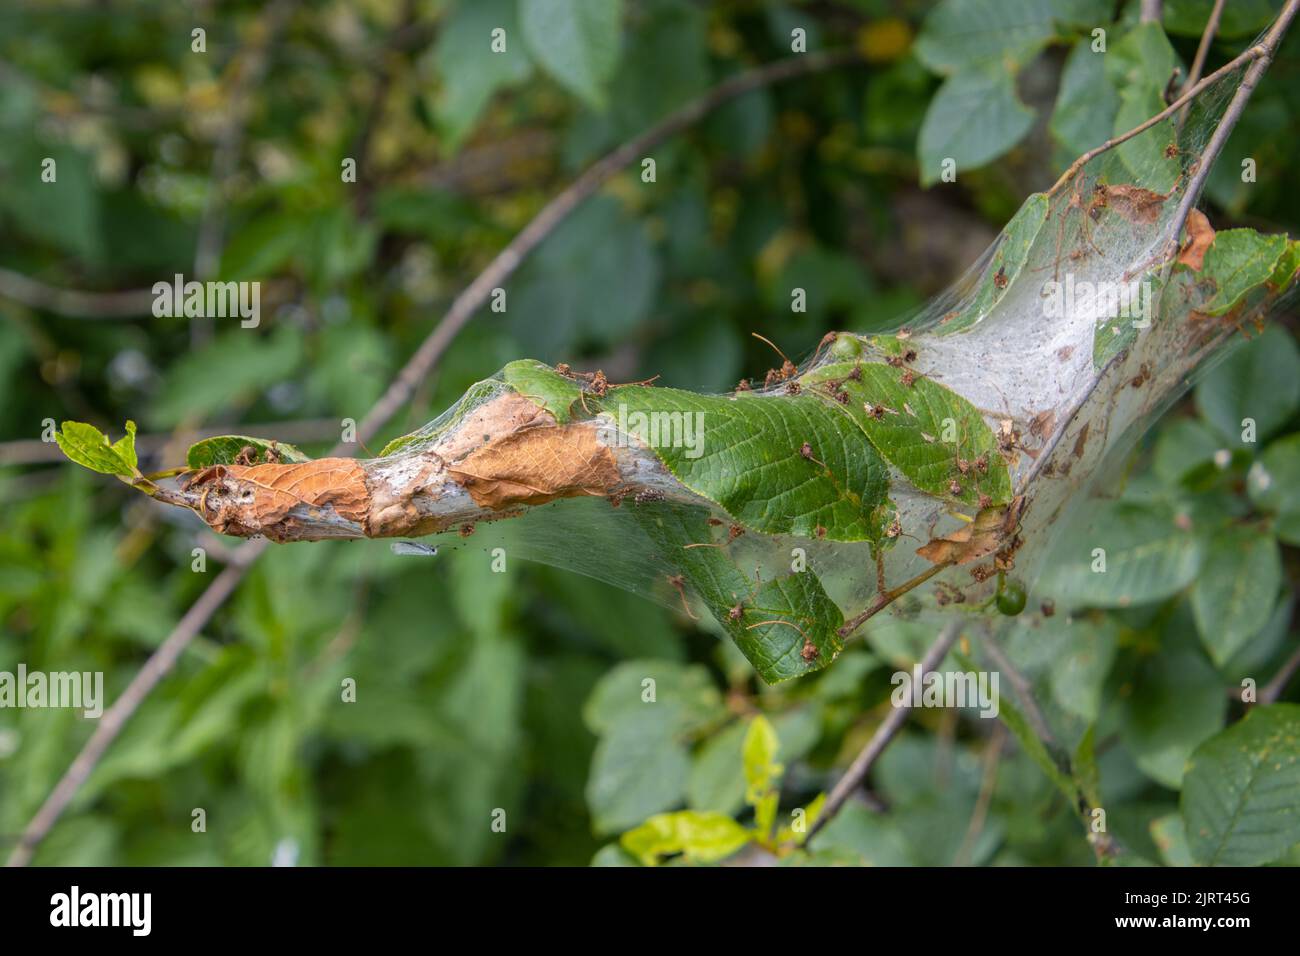 Silk web of the apple ermine moth, also called Yponomeuta malinellus or Apfel Gespinstmotte Stock Photo